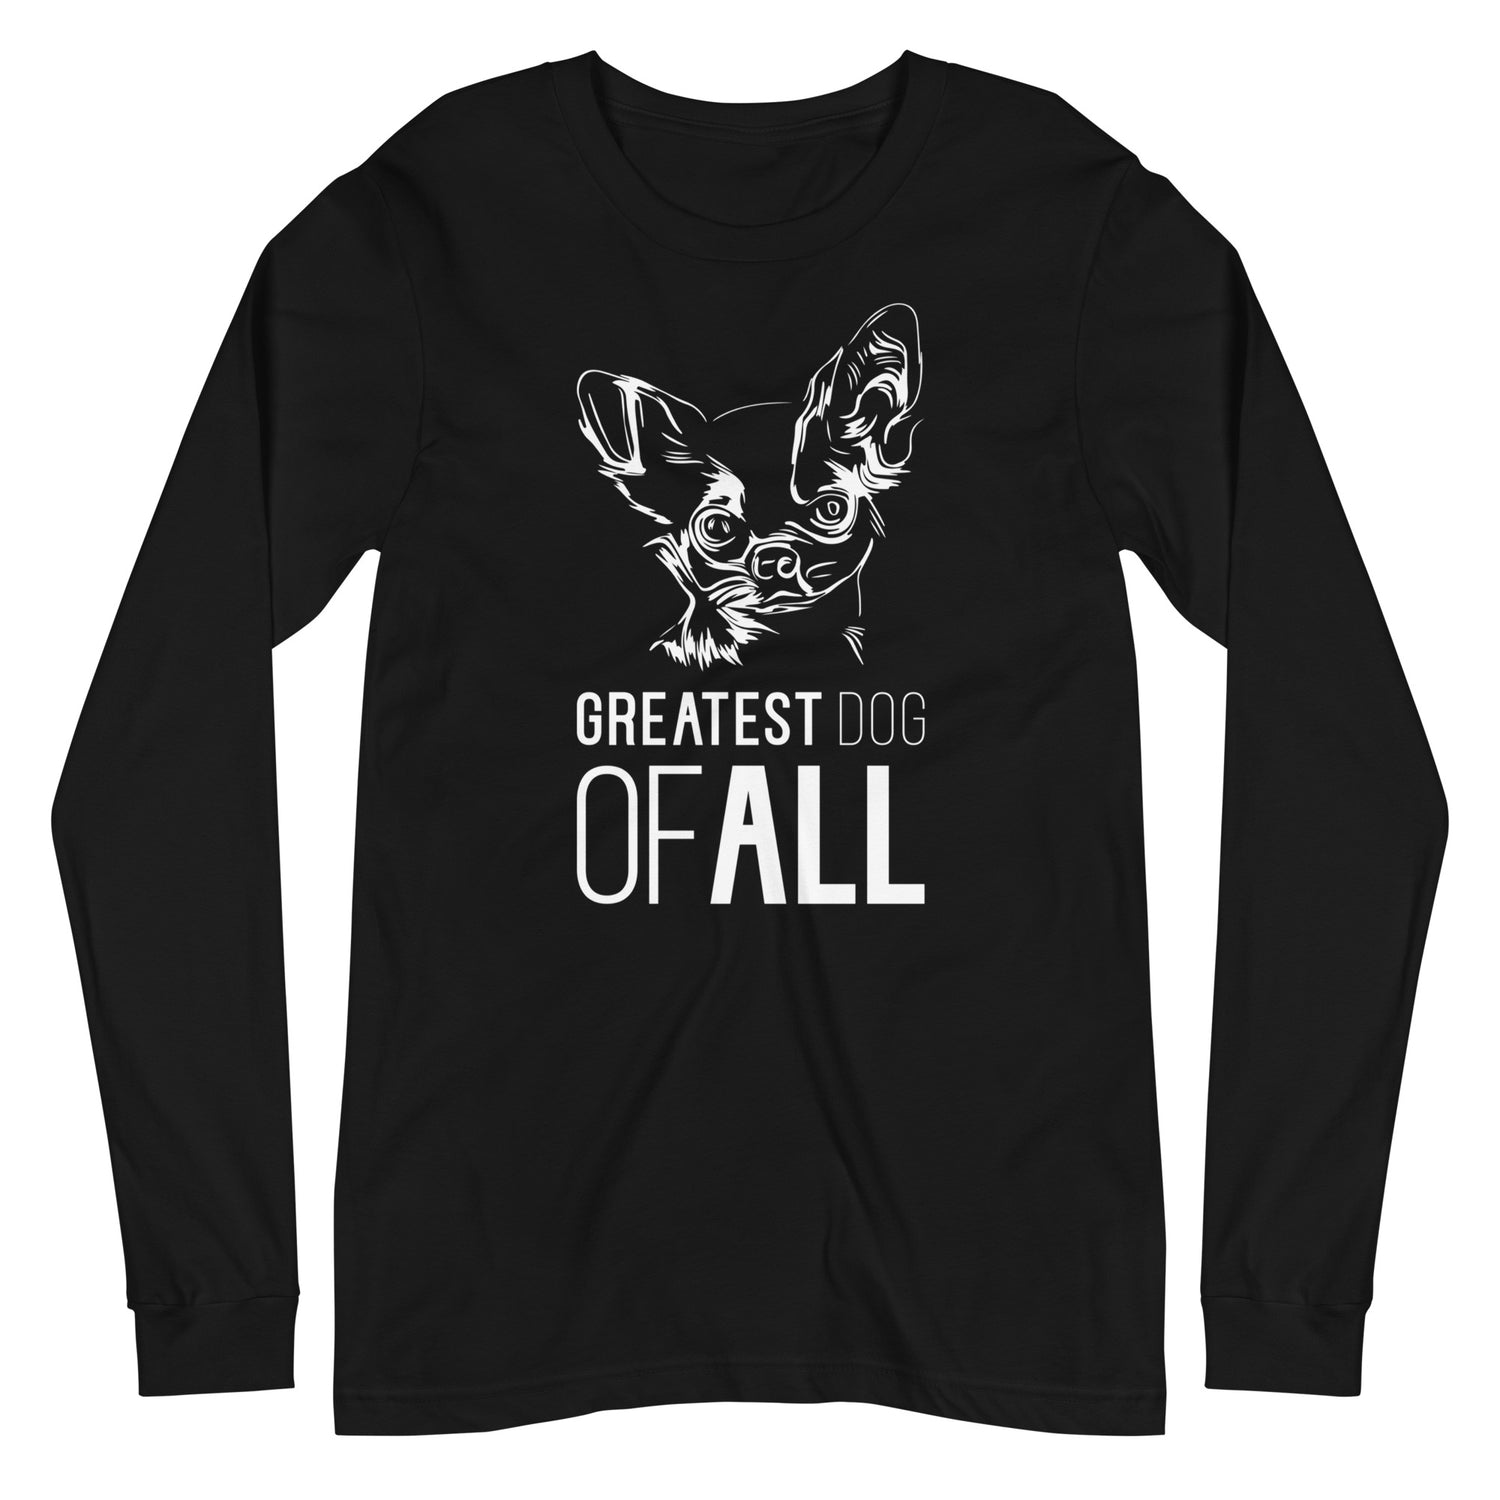 White line Chihuahua face with Greatest Dog of All caption on unisex black long sleeve t-shirt